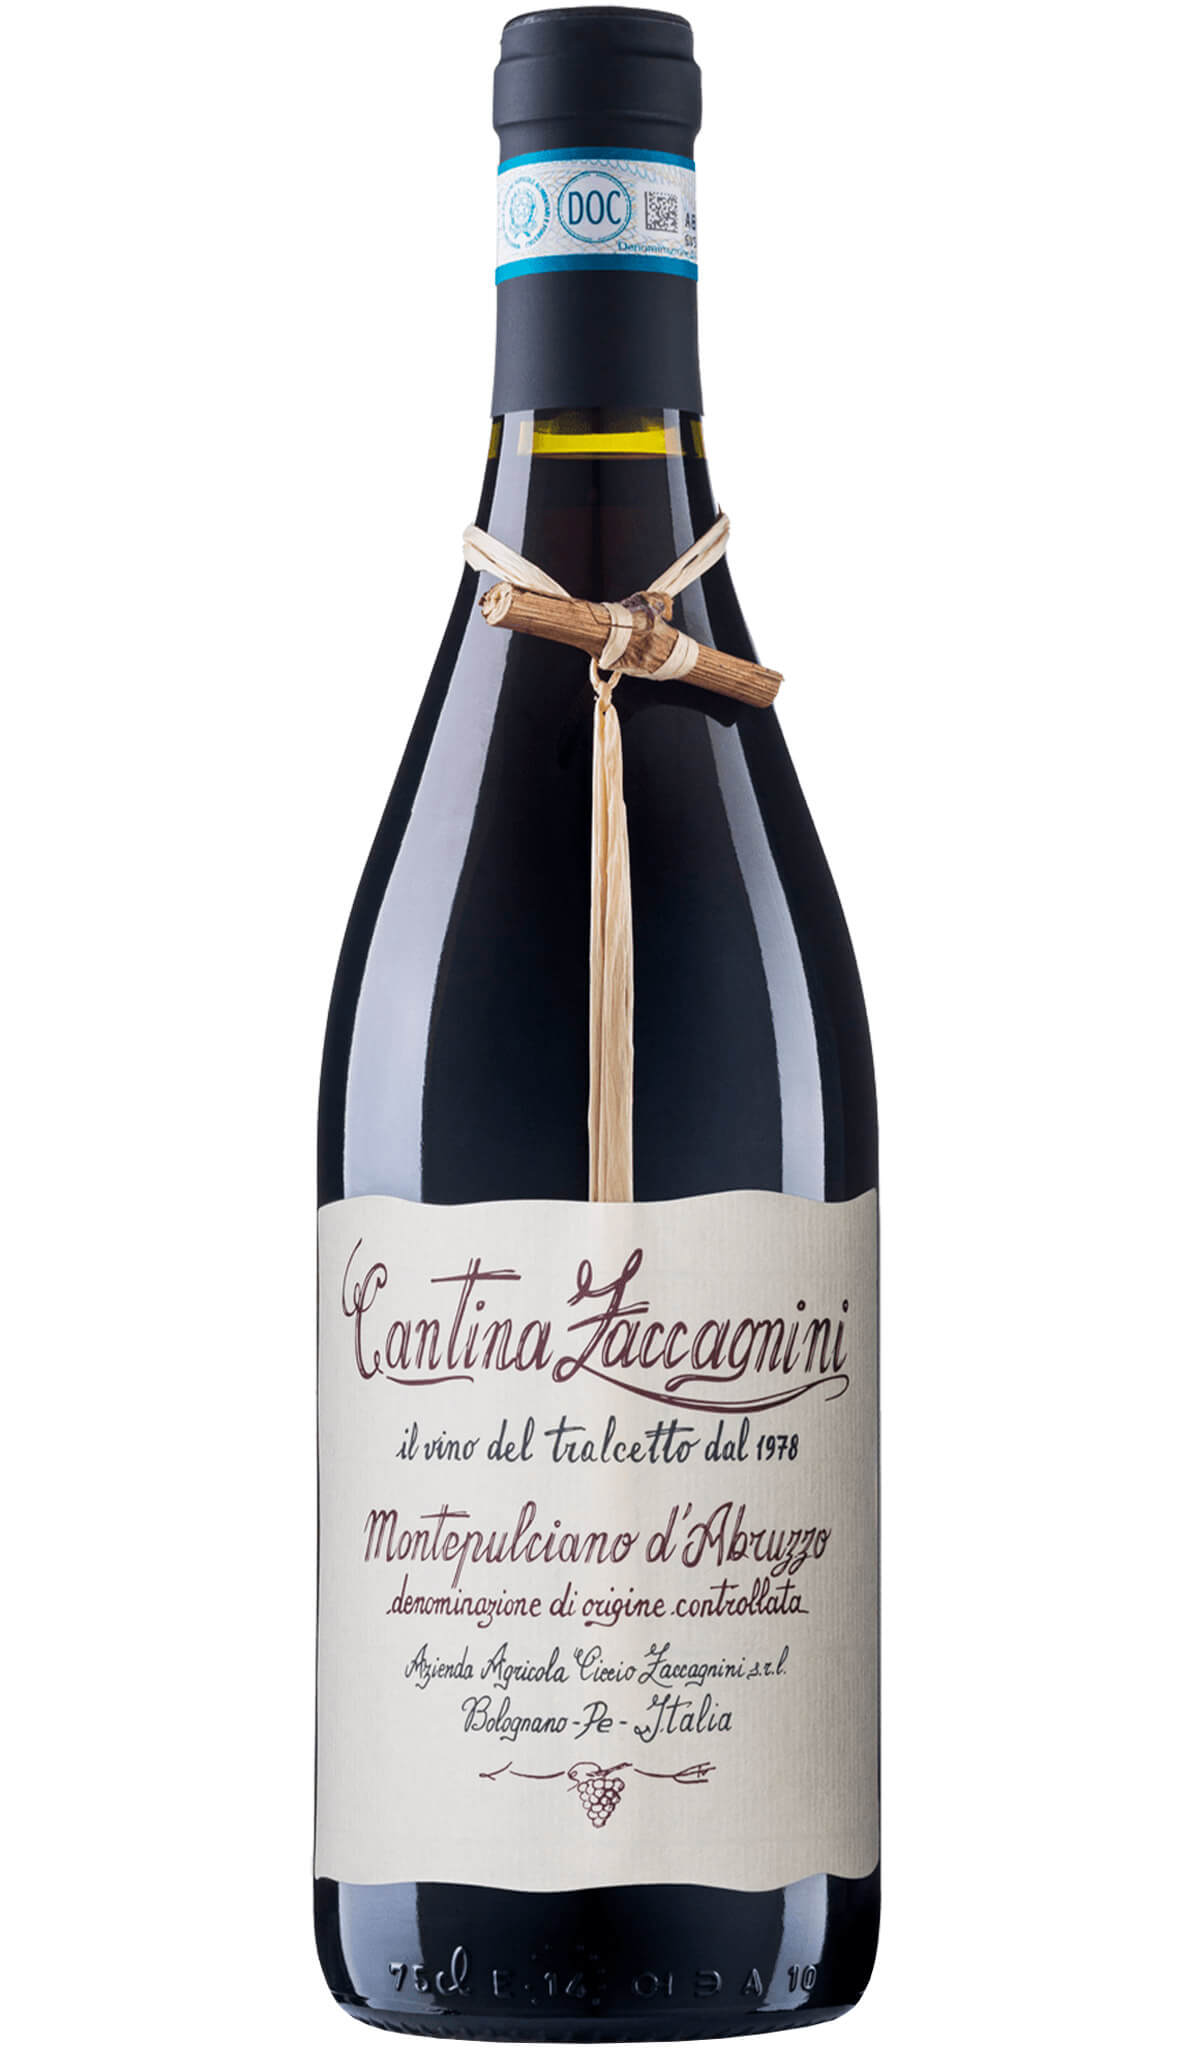 Find out more or buy Cantina Zaccagnini Montepulciano D'Abruzzo 2021 online at Wine Sellers Direct - Australia’s independent liquor specialists.